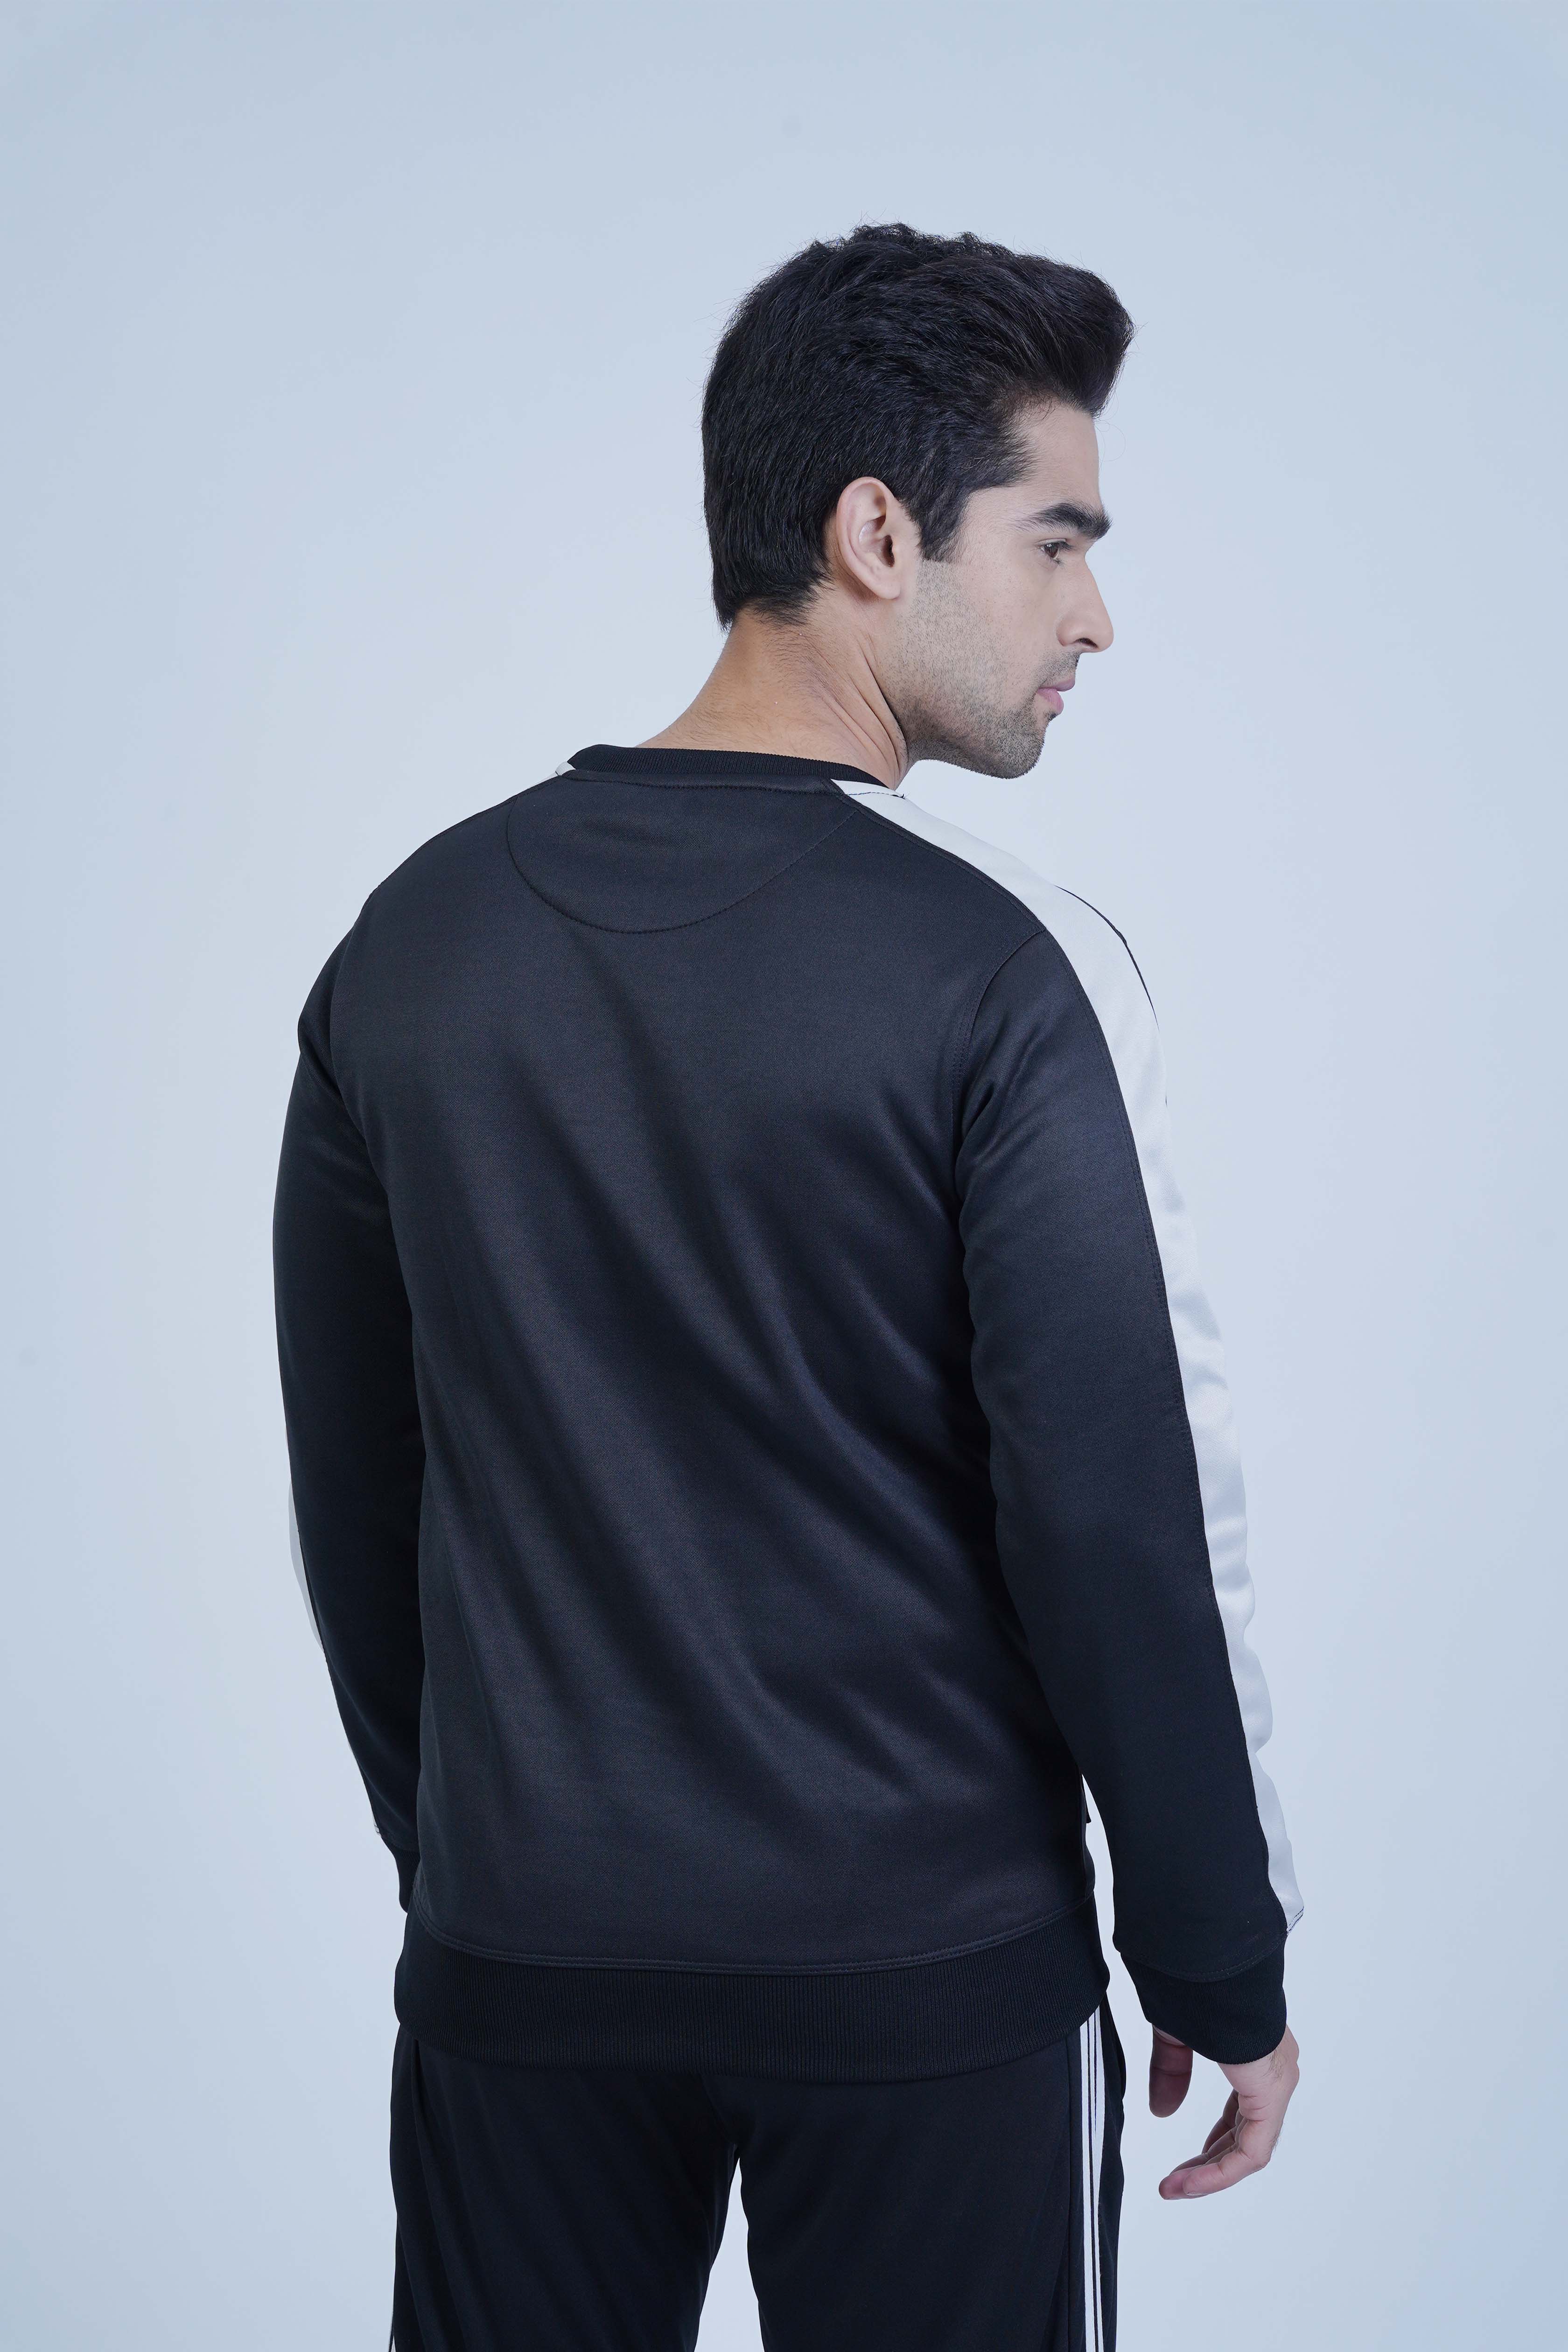 Imperial 2.0 Black Sweatshirt - The Xea Collection